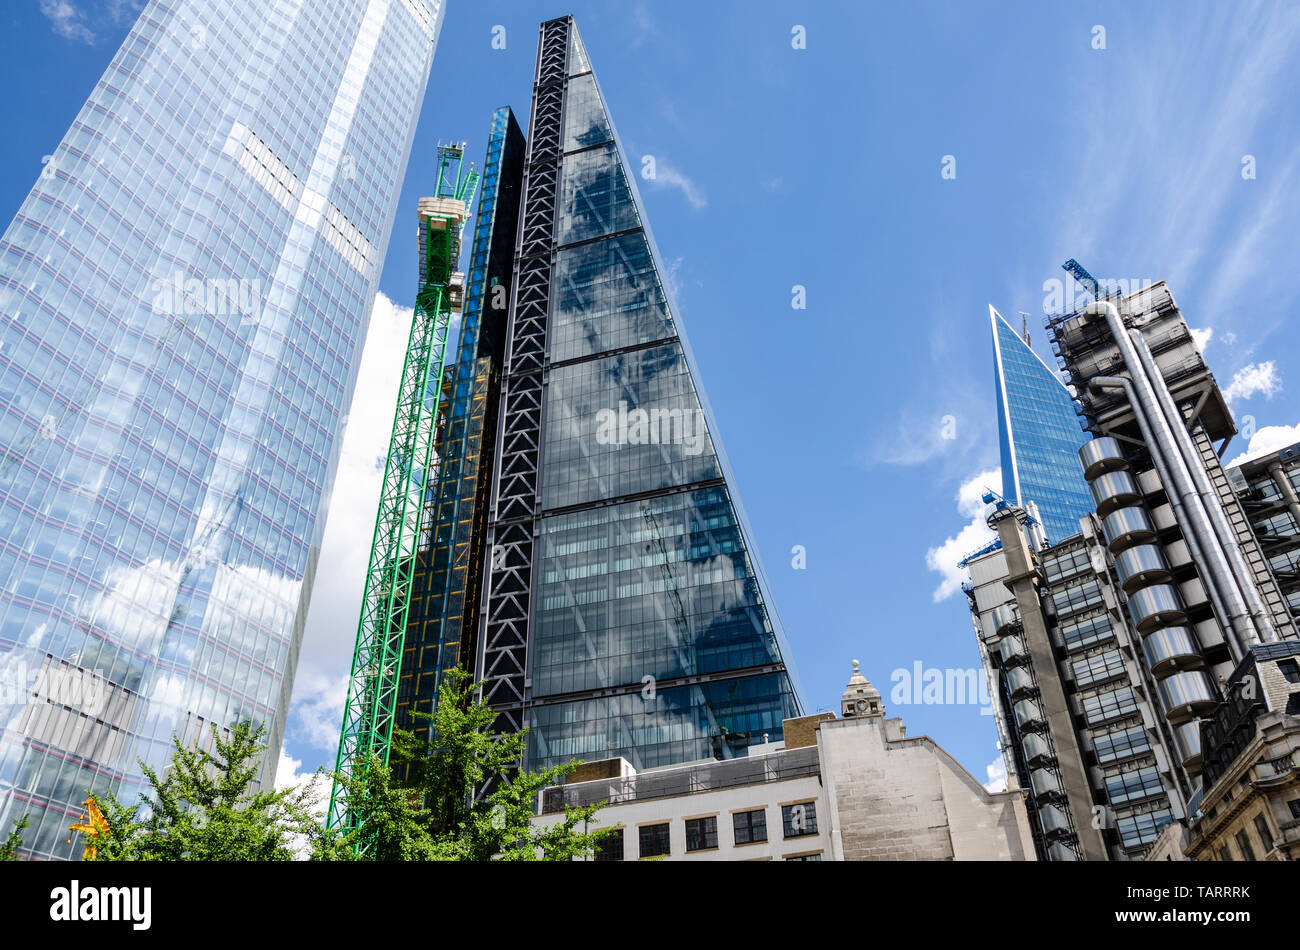 Modern skyscrapers reach into the blue sky in The Financial District of The City of London, UK Stock Photo